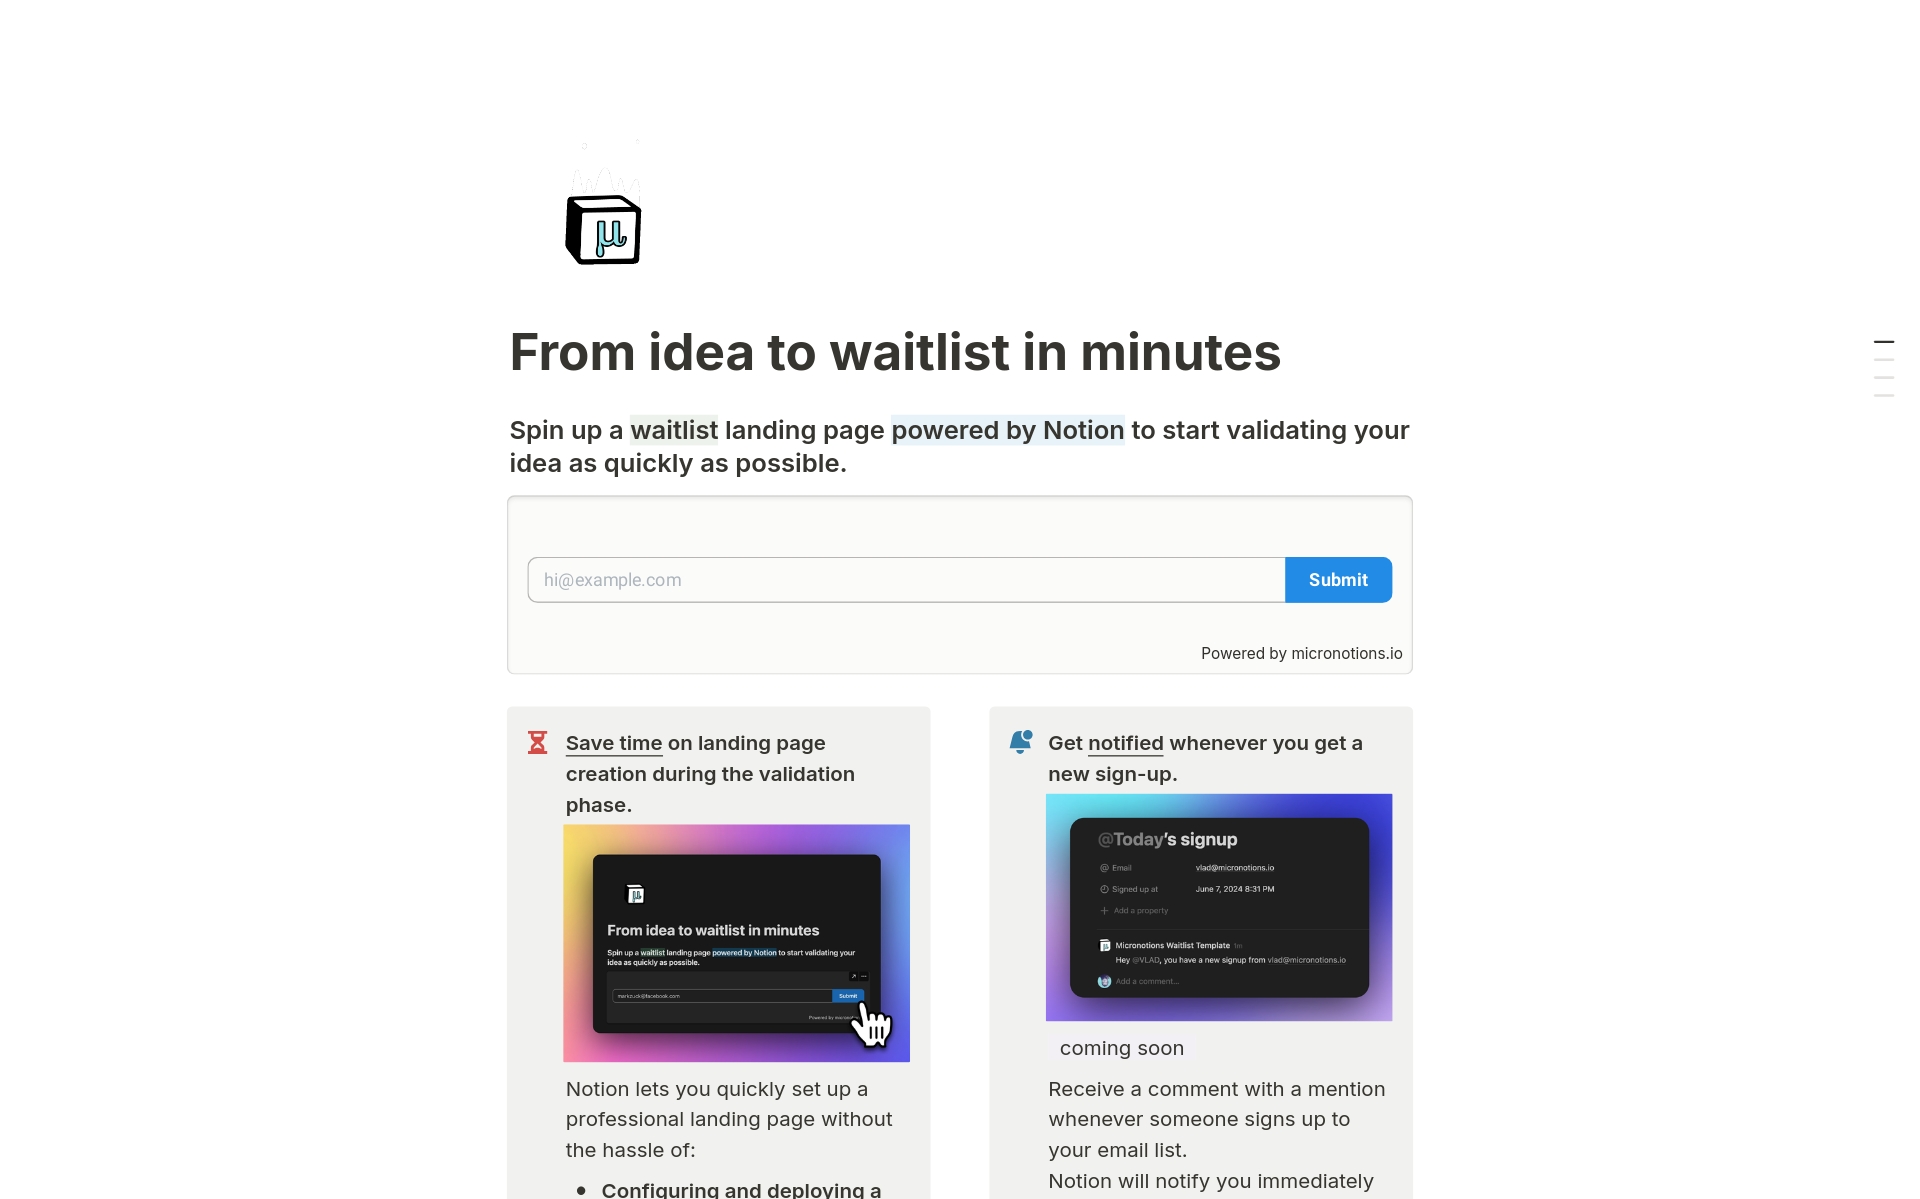 From idea to waitlist in minutes.
Spin up a waitlist landing page powered by Notion to start validating your idea as quickly as possible.